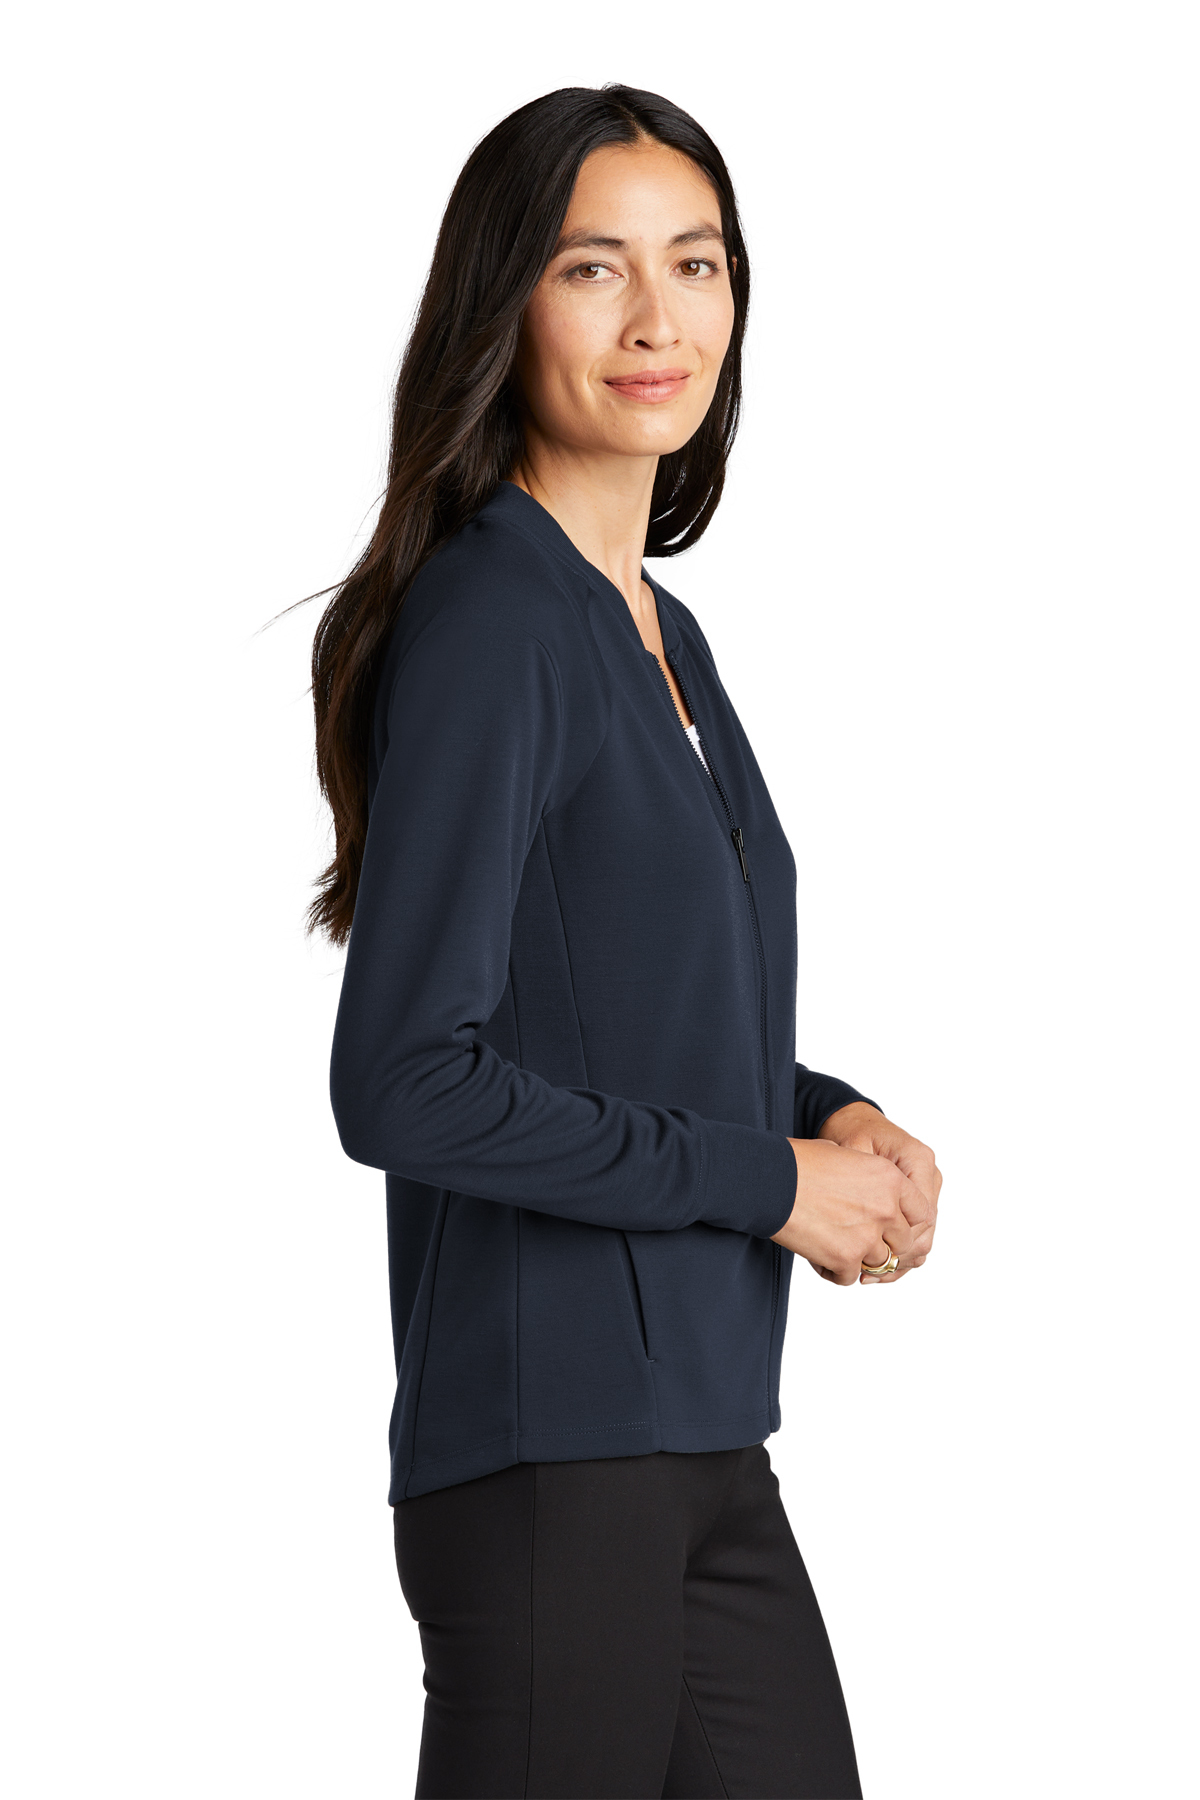 Mercer+Mettle Women's Double-Knit Bomber | Product | Company Casuals